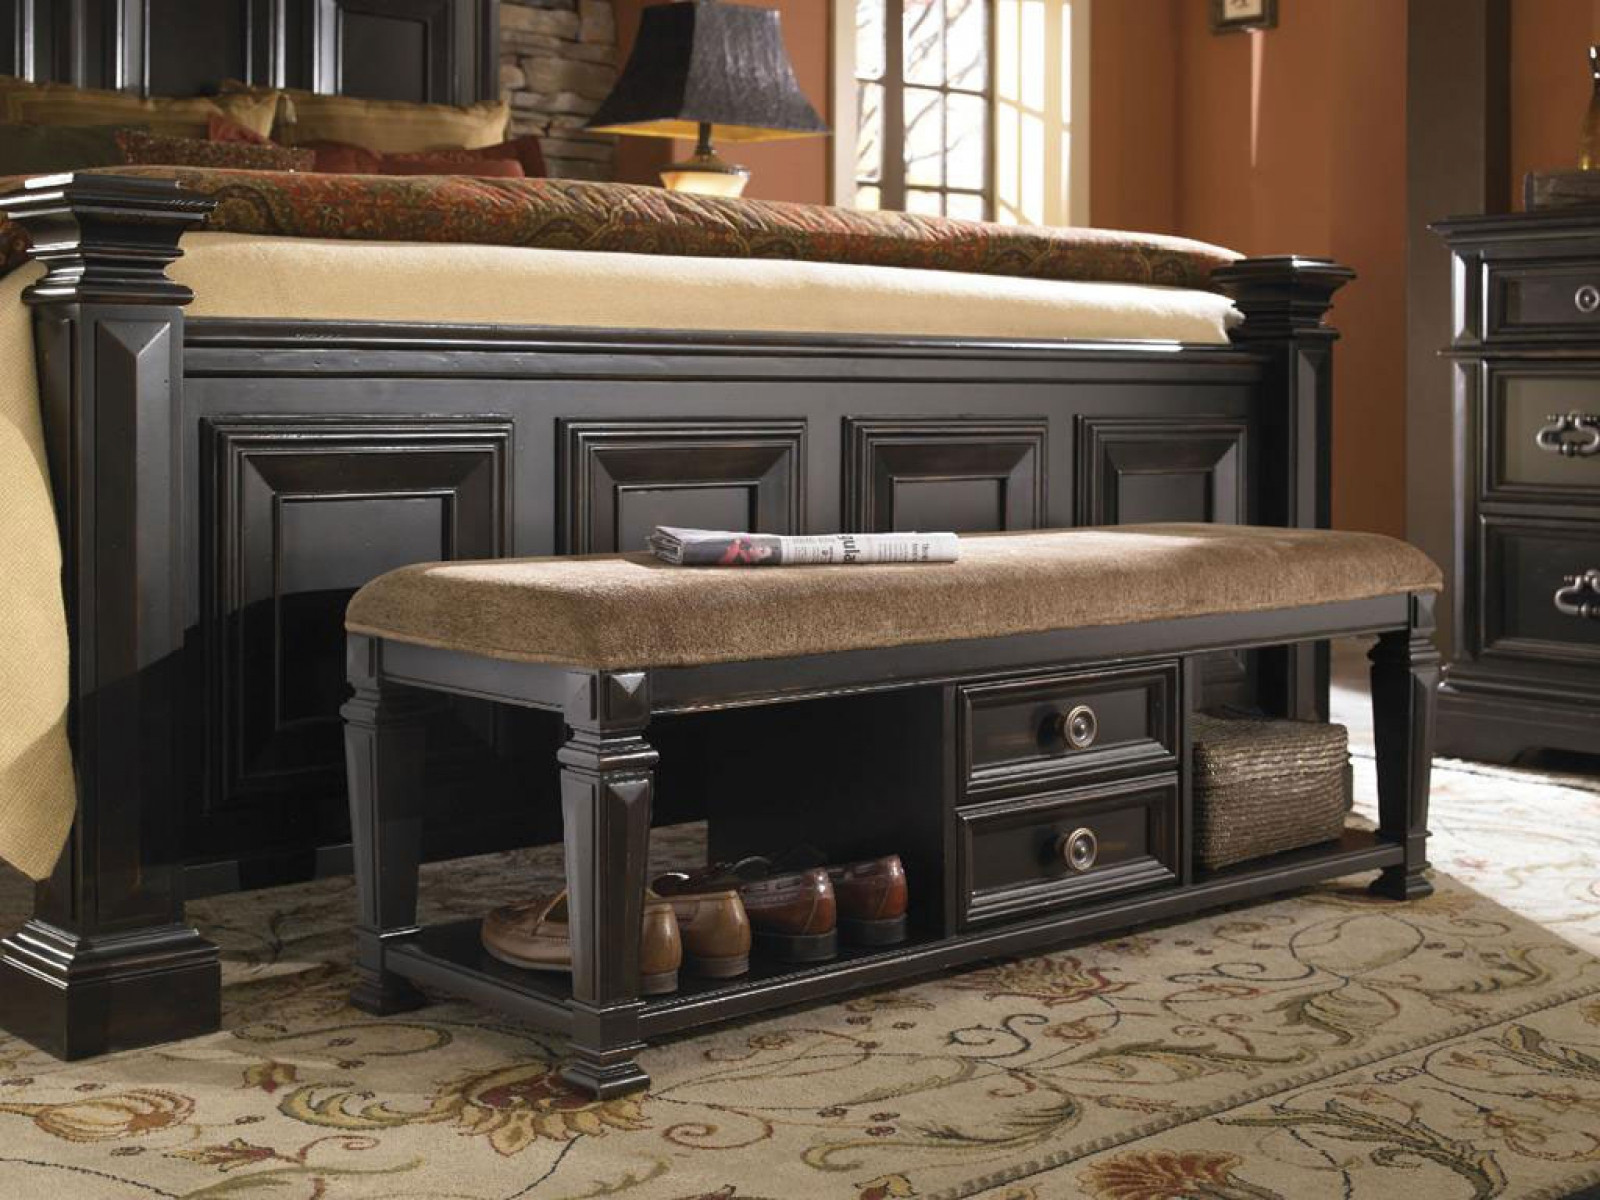 Storage Benches For Bedroom
 Add an Extra Seating or Storage to Your Bedroom with an